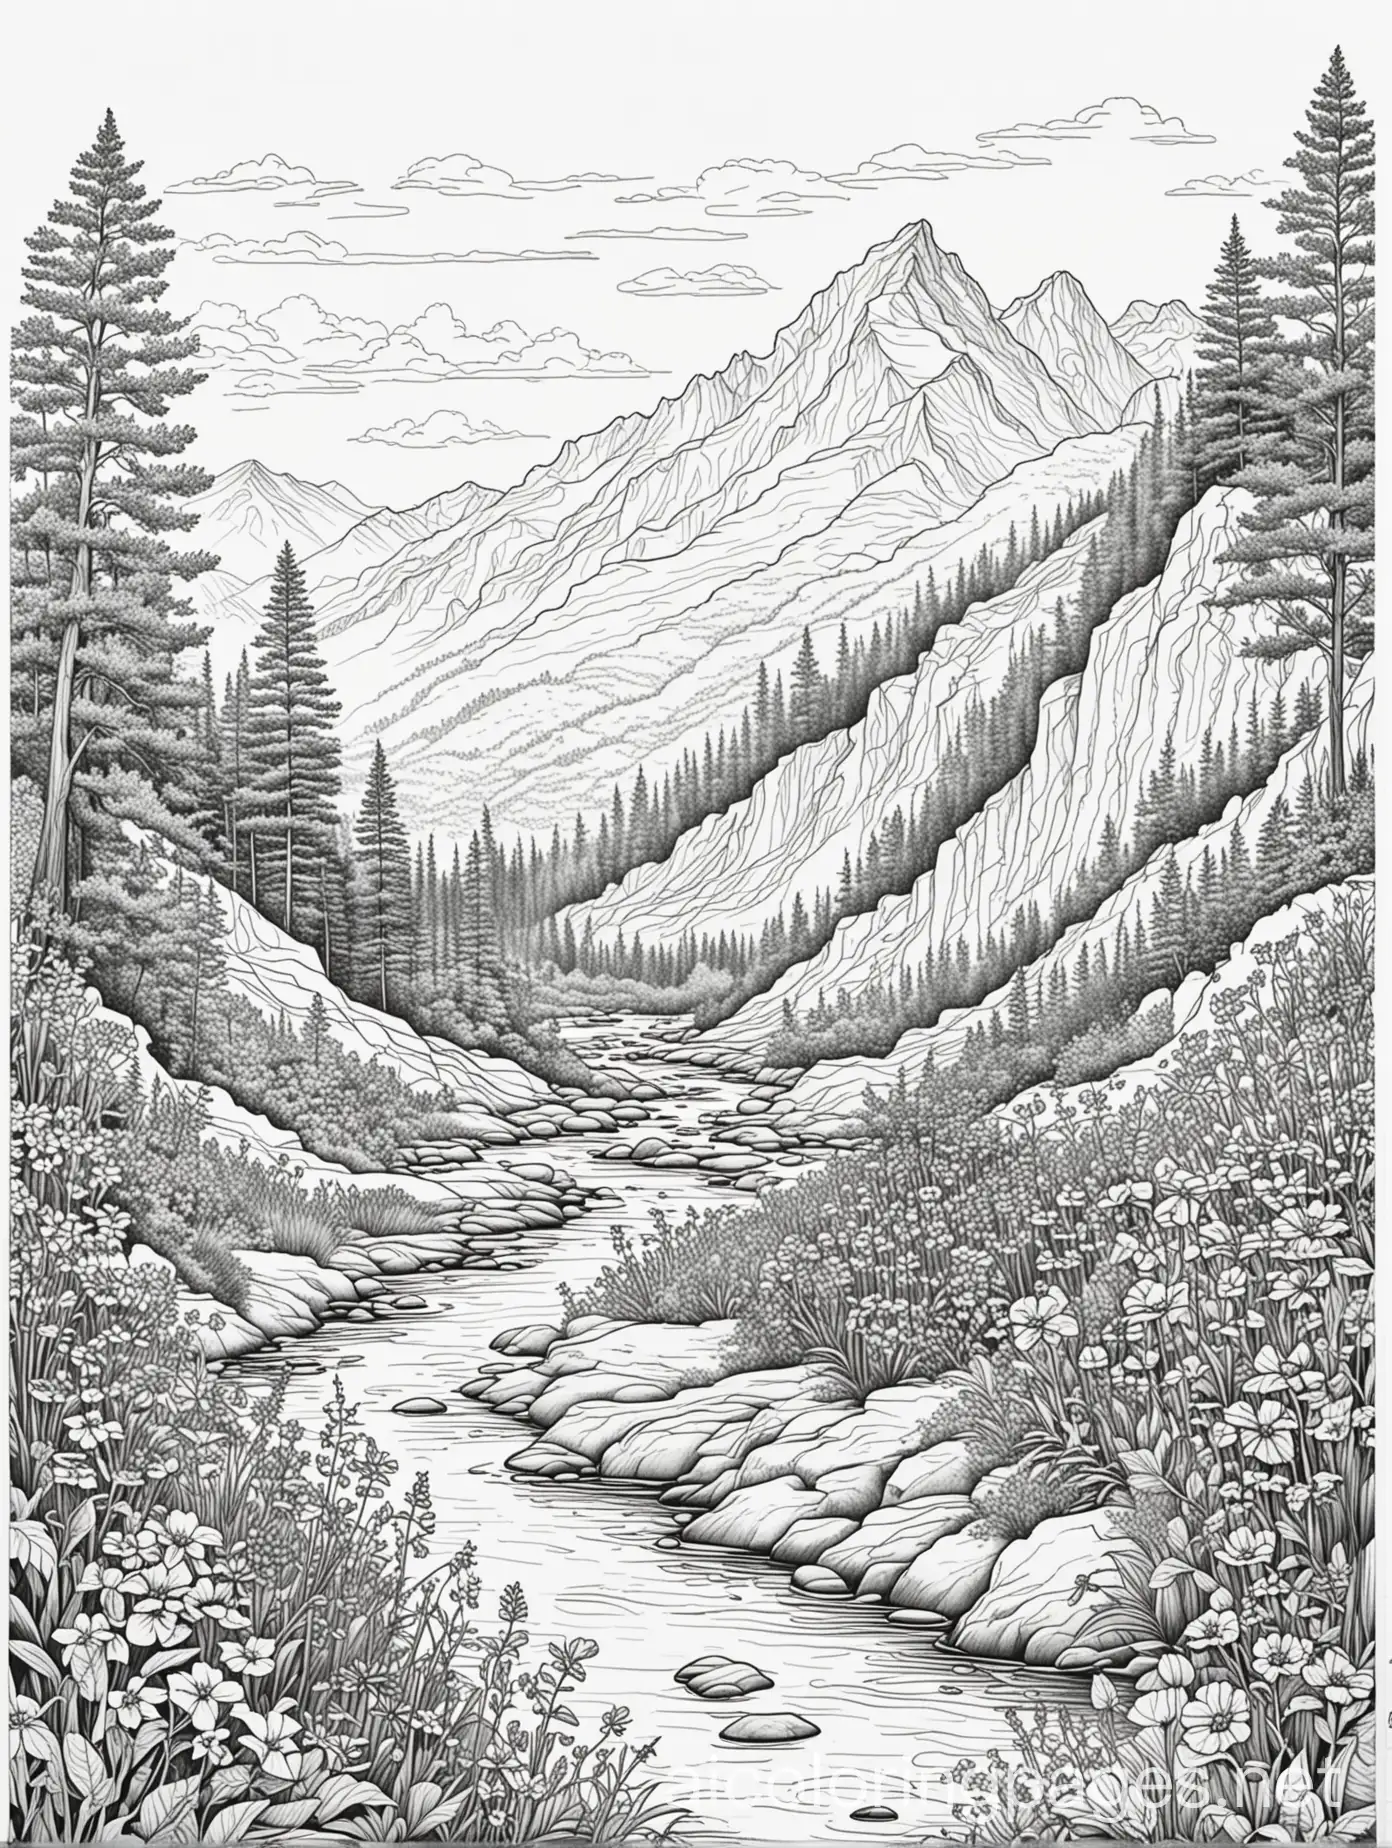 Mountain and flowing stream with lots of wild flowers, Coloring Page, black and white, line art, white background, Simplicity, Ample White Space. The background of the coloring page is plain white to make it easy for young children to color within the lines. The outlines of all the subjects are easy to distinguish, making it simple for kids to color without too much difficulty